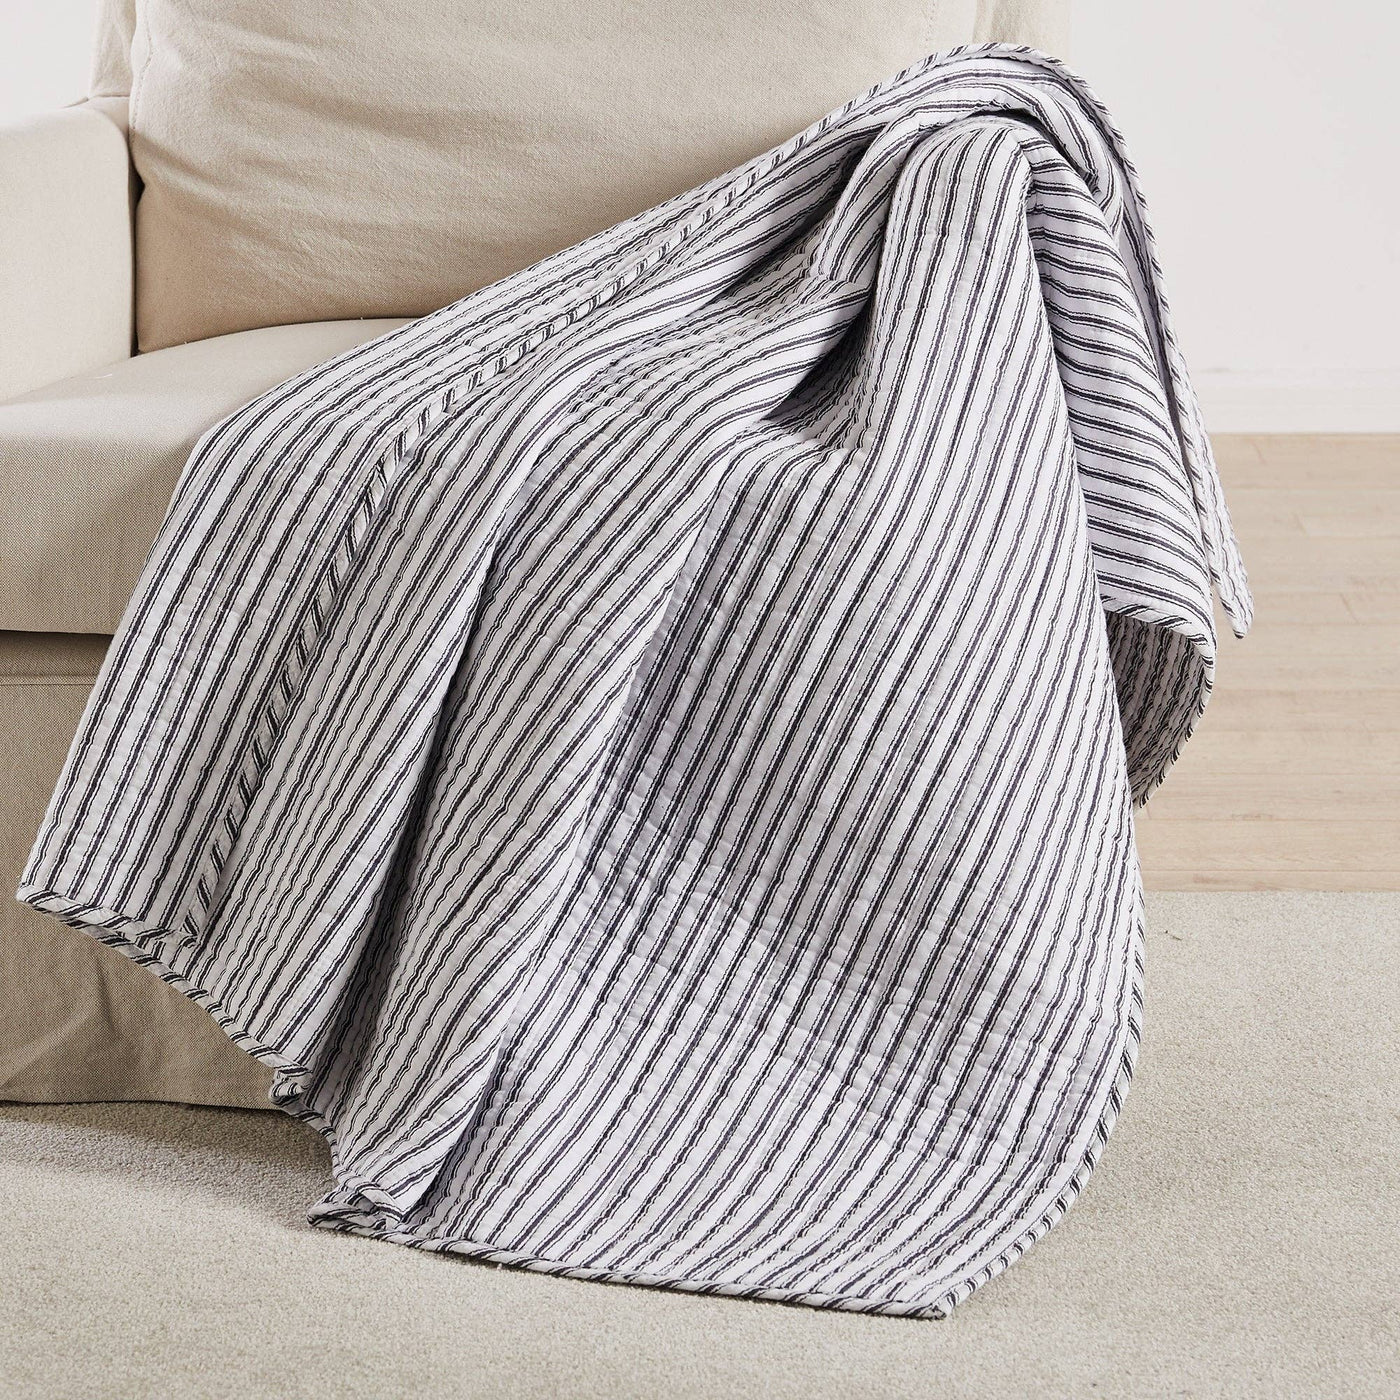 Tobago Stripe Charcoal Quilted Throw